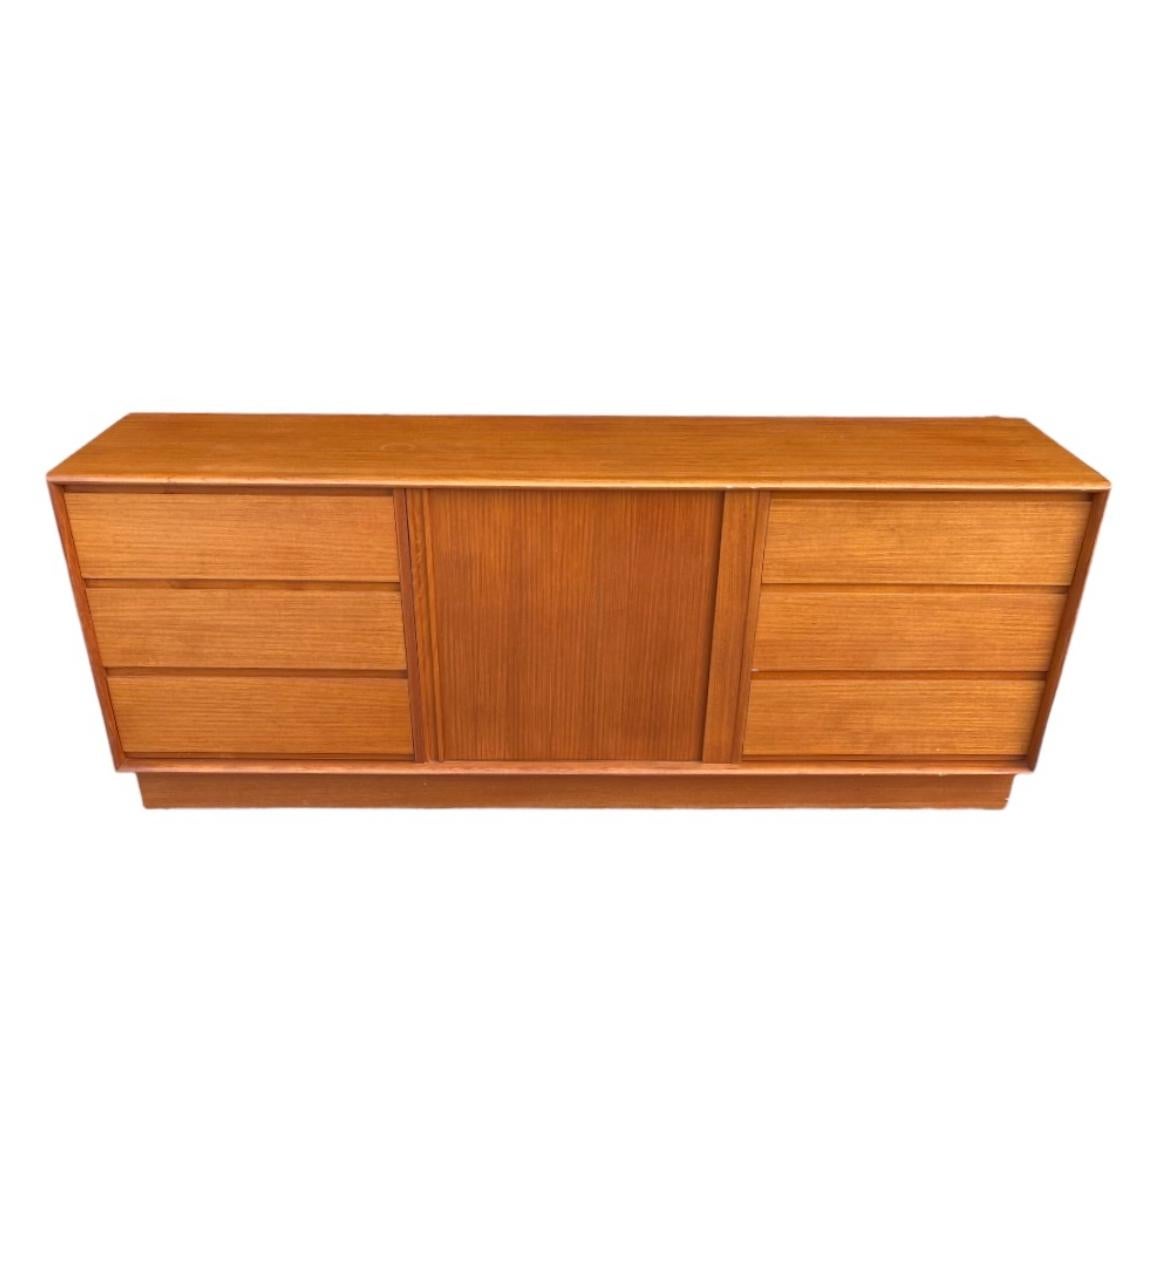 Handsome and elegant Danish modern long dresser in teak. Versatile enough to be used as a credenza or media center. Symmetric form with drawers on both ends with vanishing tambour door in the middle to reveal ample storage space. Beautiful color and